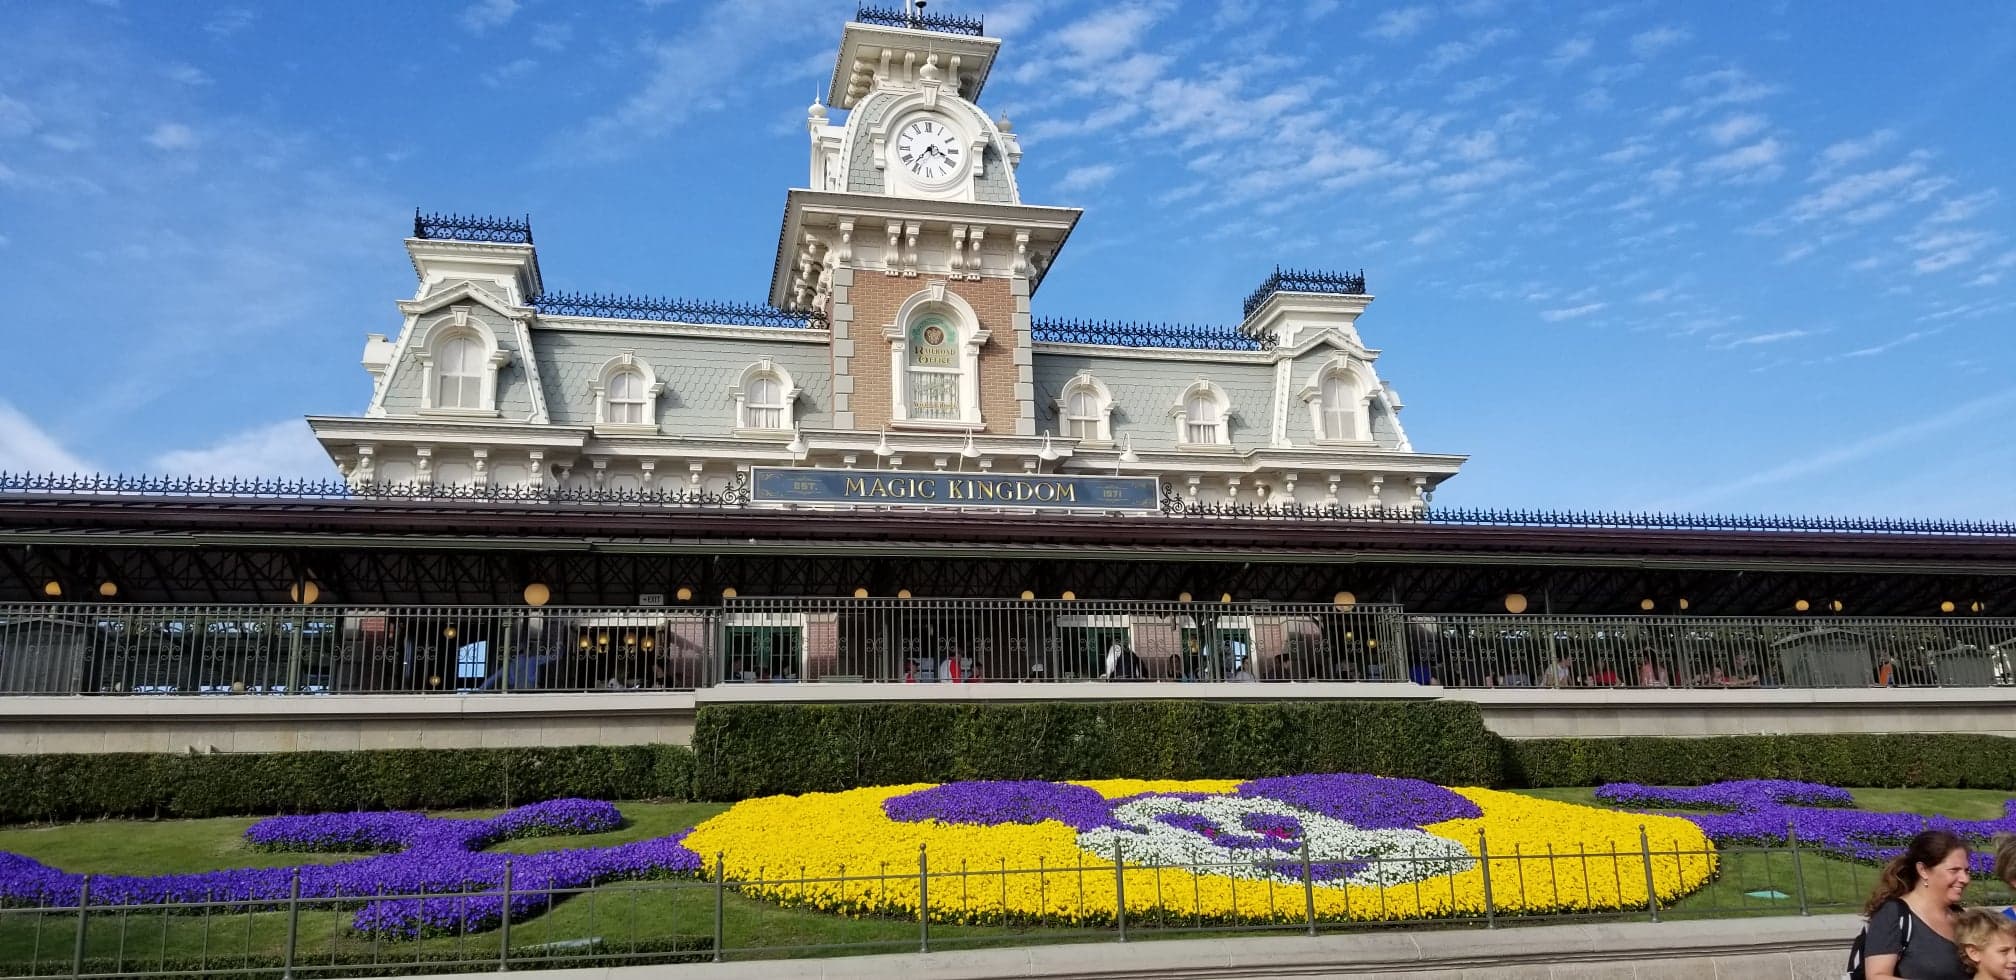 Great Grandmother Arrested at Disney World for trying to bring CBD Oil into the Magic Kingdom